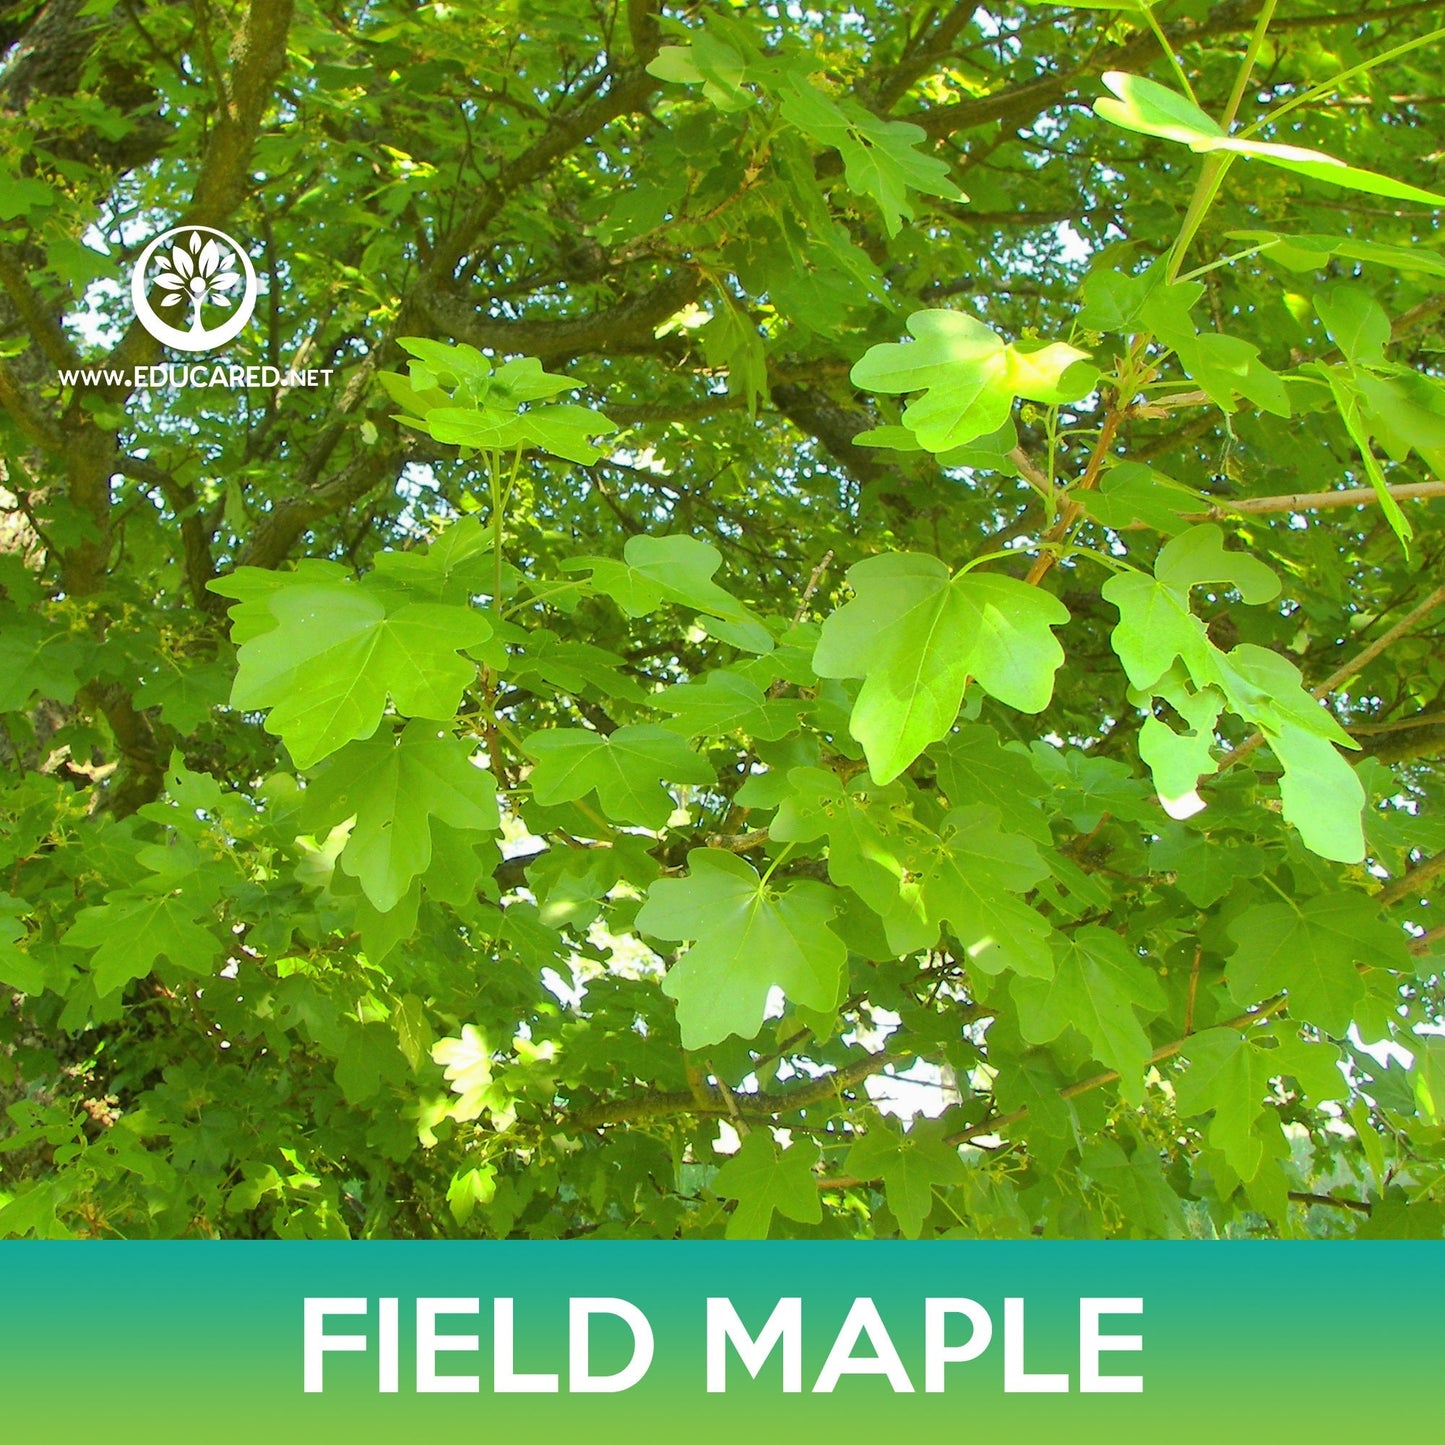 Field Maple Seeds, Common Maple, Acer campestre